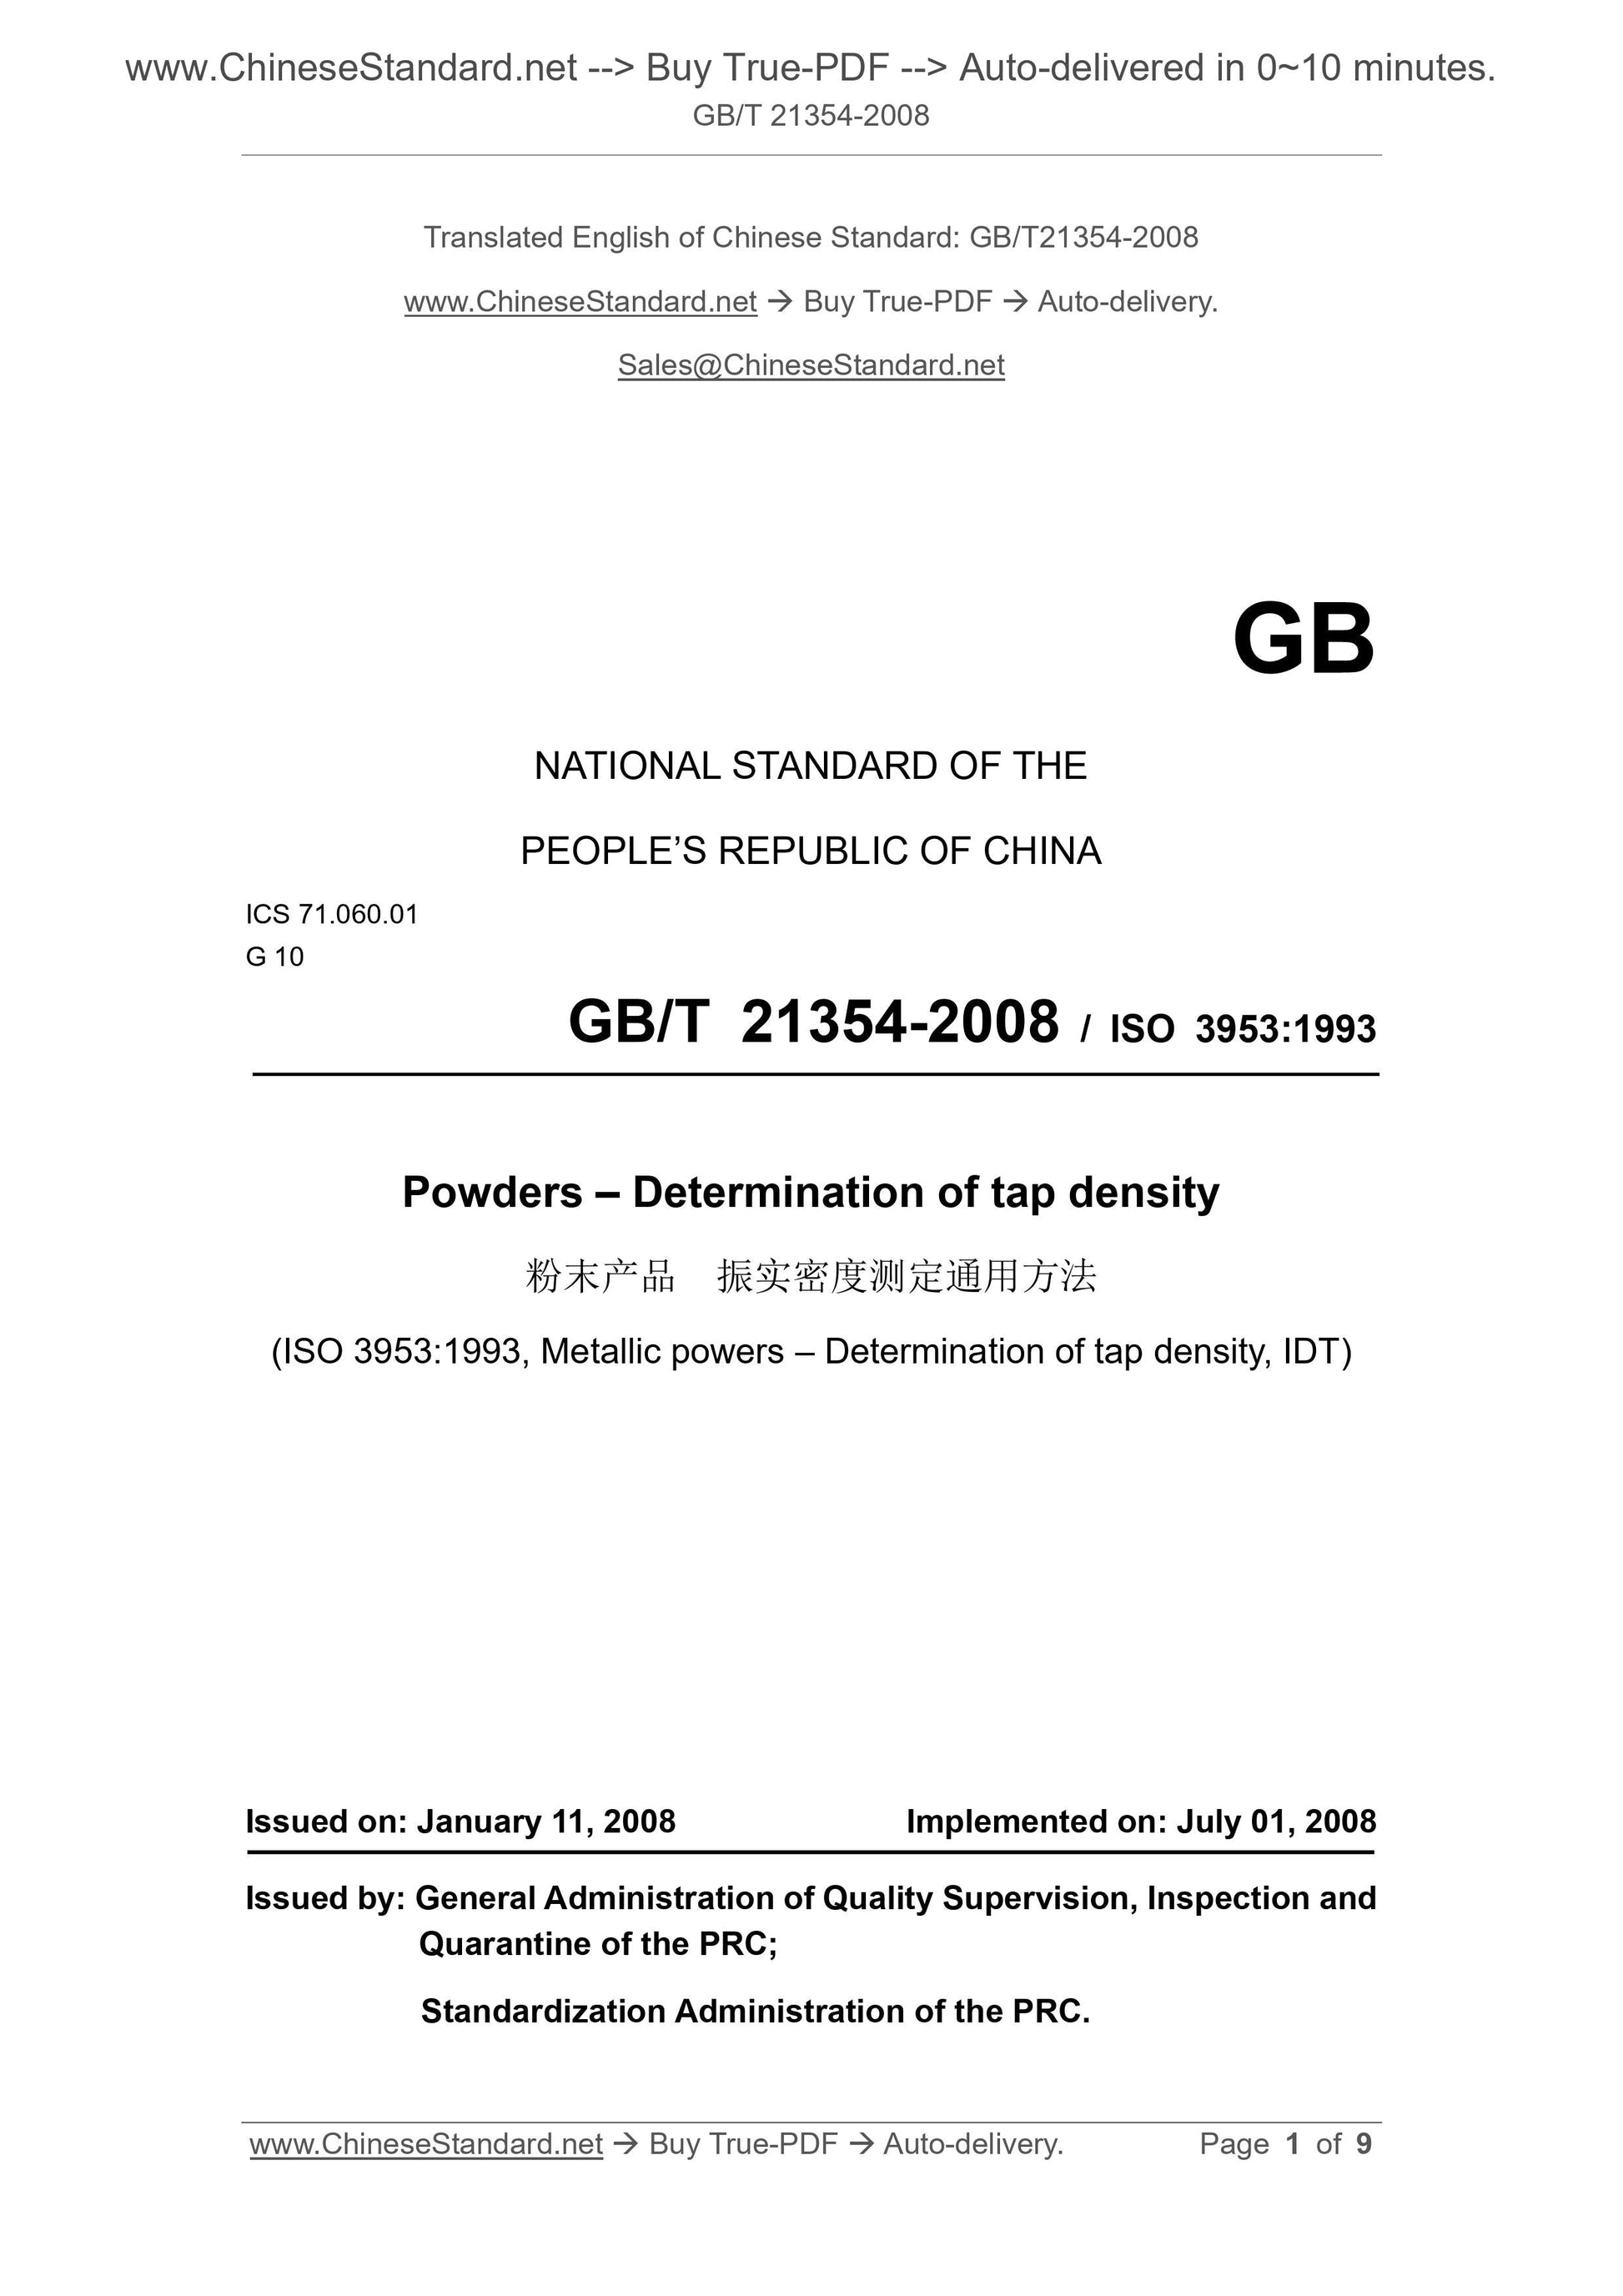 GB/T 21354-2008 Page 1